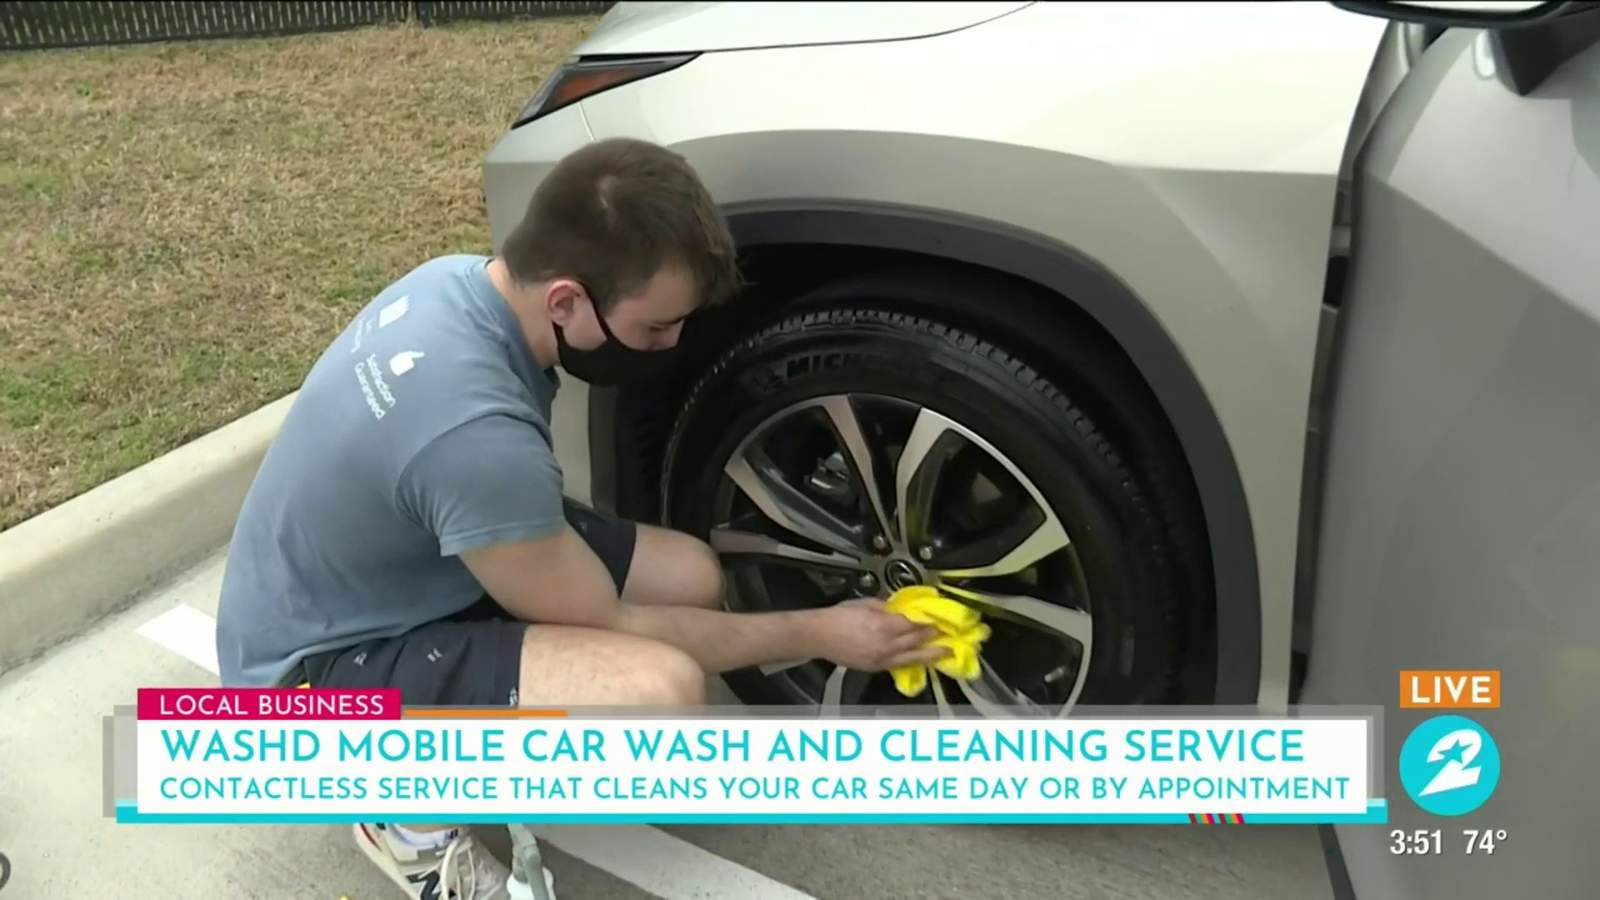 UH alum creates Washd, a contactless mobile car wash and cleaning service